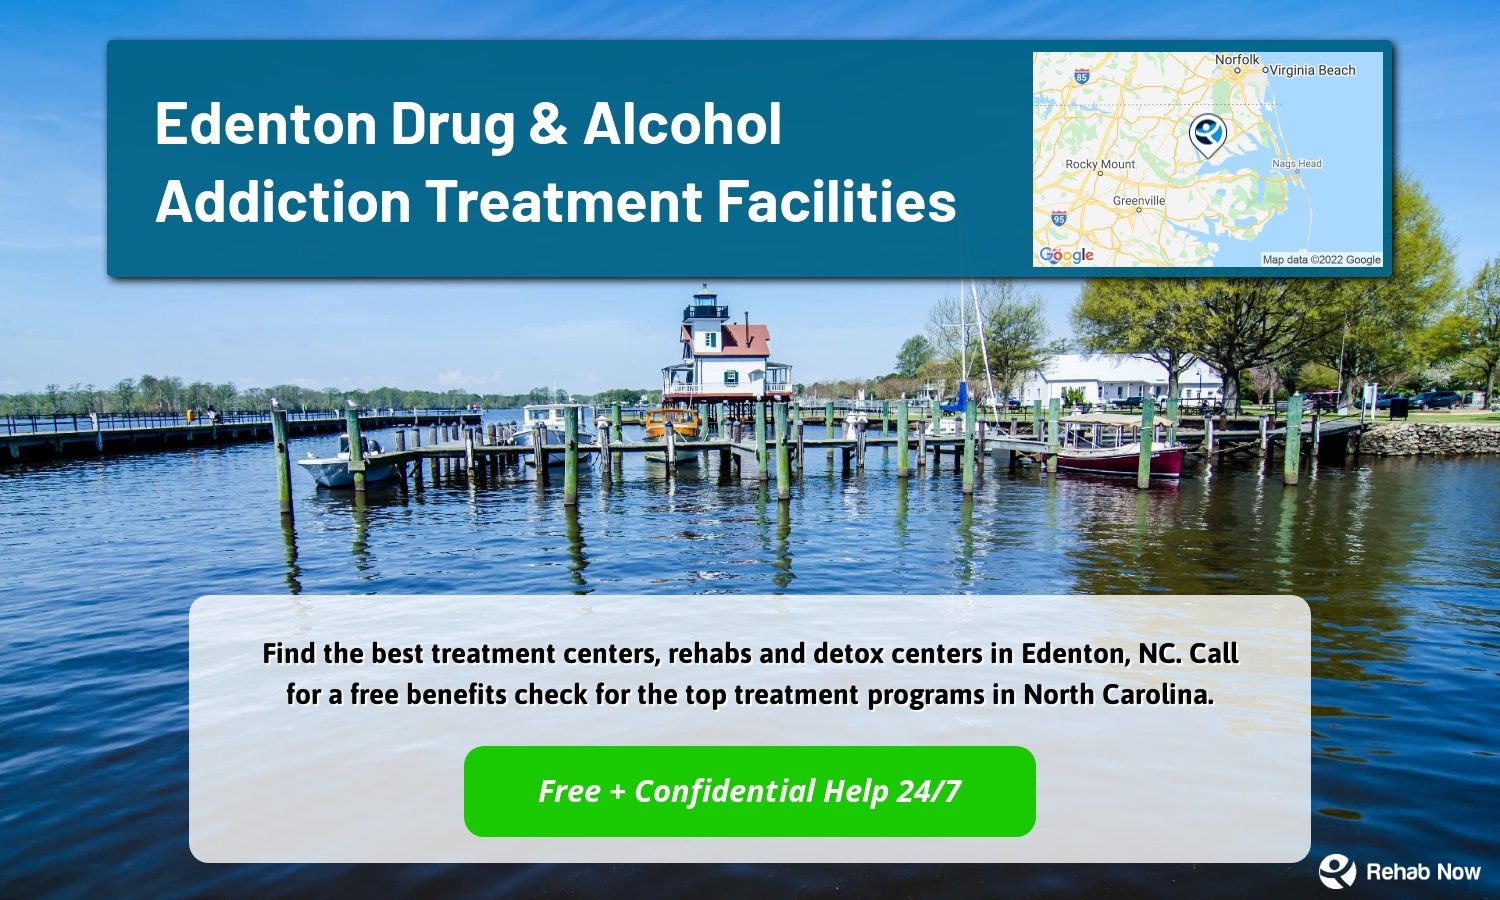 Find the best treatment centers, rehabs and detox centers in Edenton, NC. Call for a free benefits check for the top treatment programs in North Carolina.